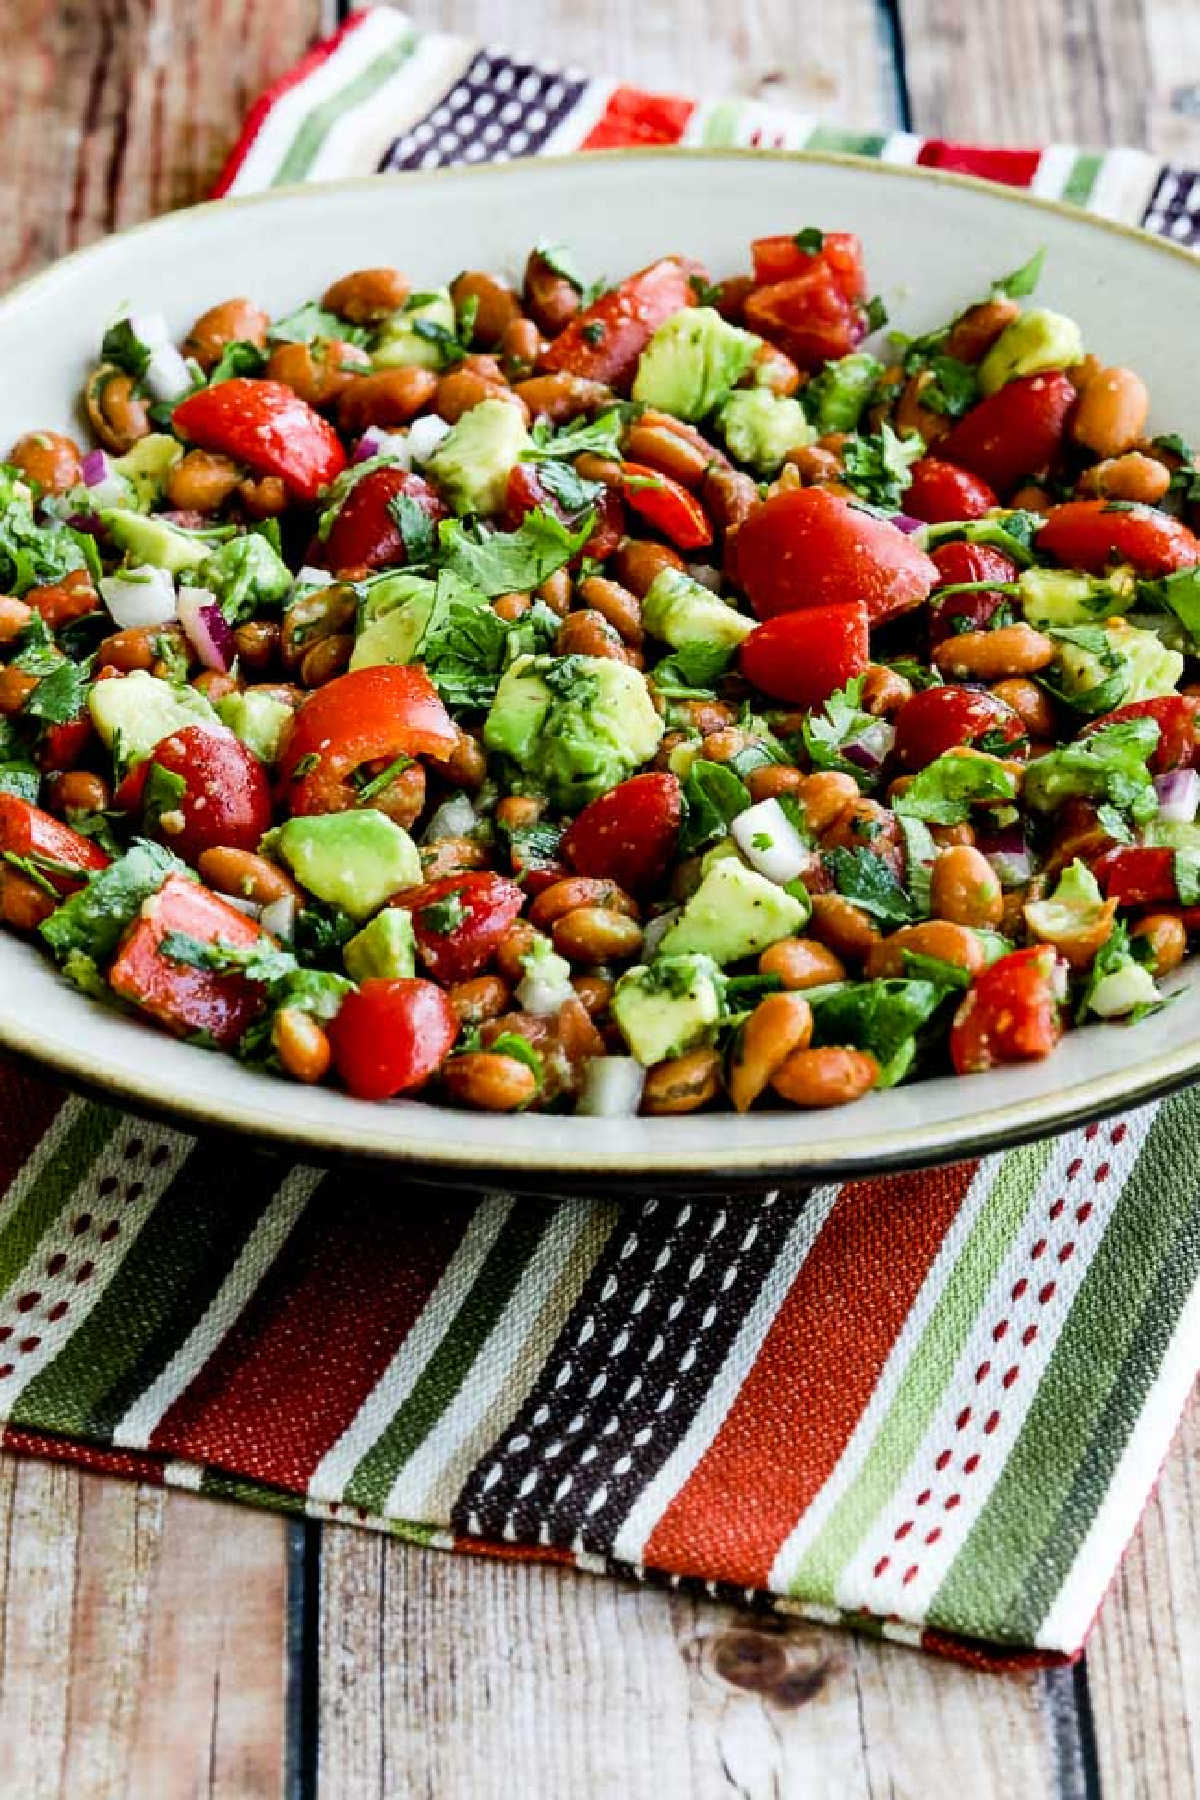 Pinto Bean Salad with Avocado and Tomatoes in serving bowl on striped napkin